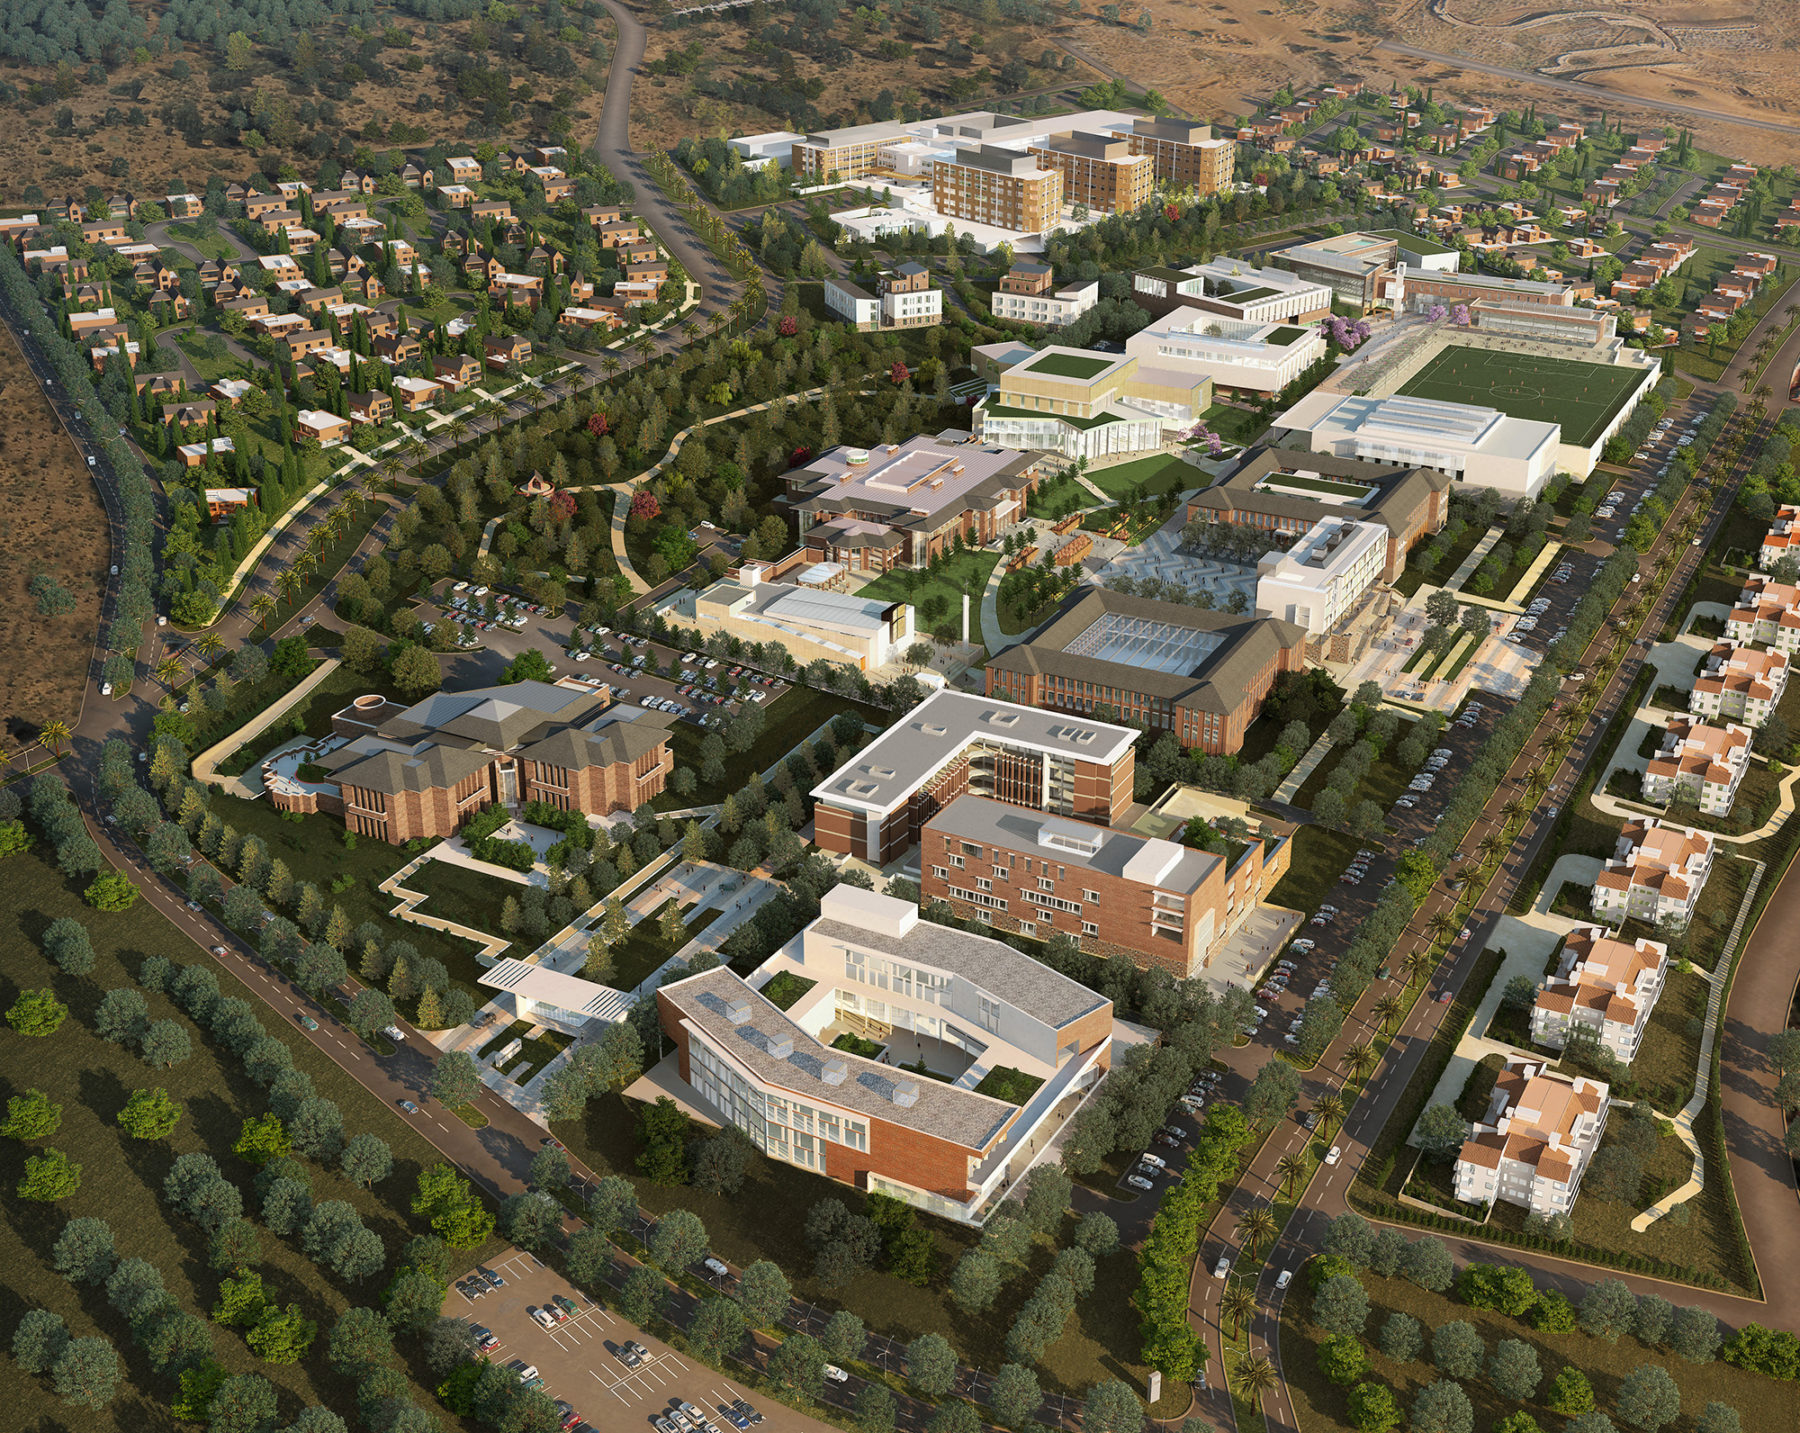 Aerial rendering of the campus vision